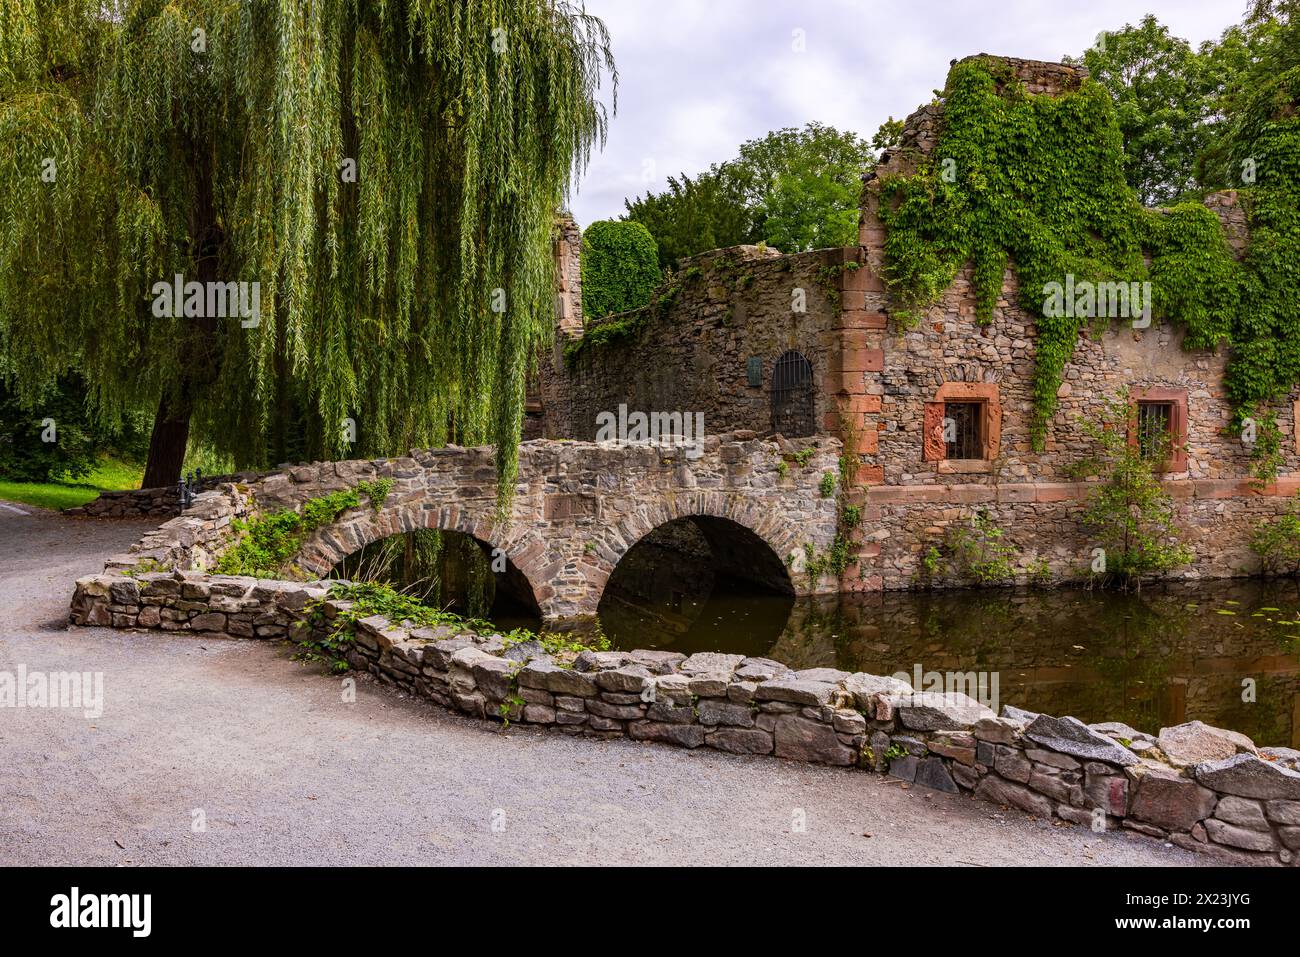 Dreamy ruins with a historical ambience in the picturesque Schöntal city park under old trees, ancient arches and cloudy skies Stock Photo